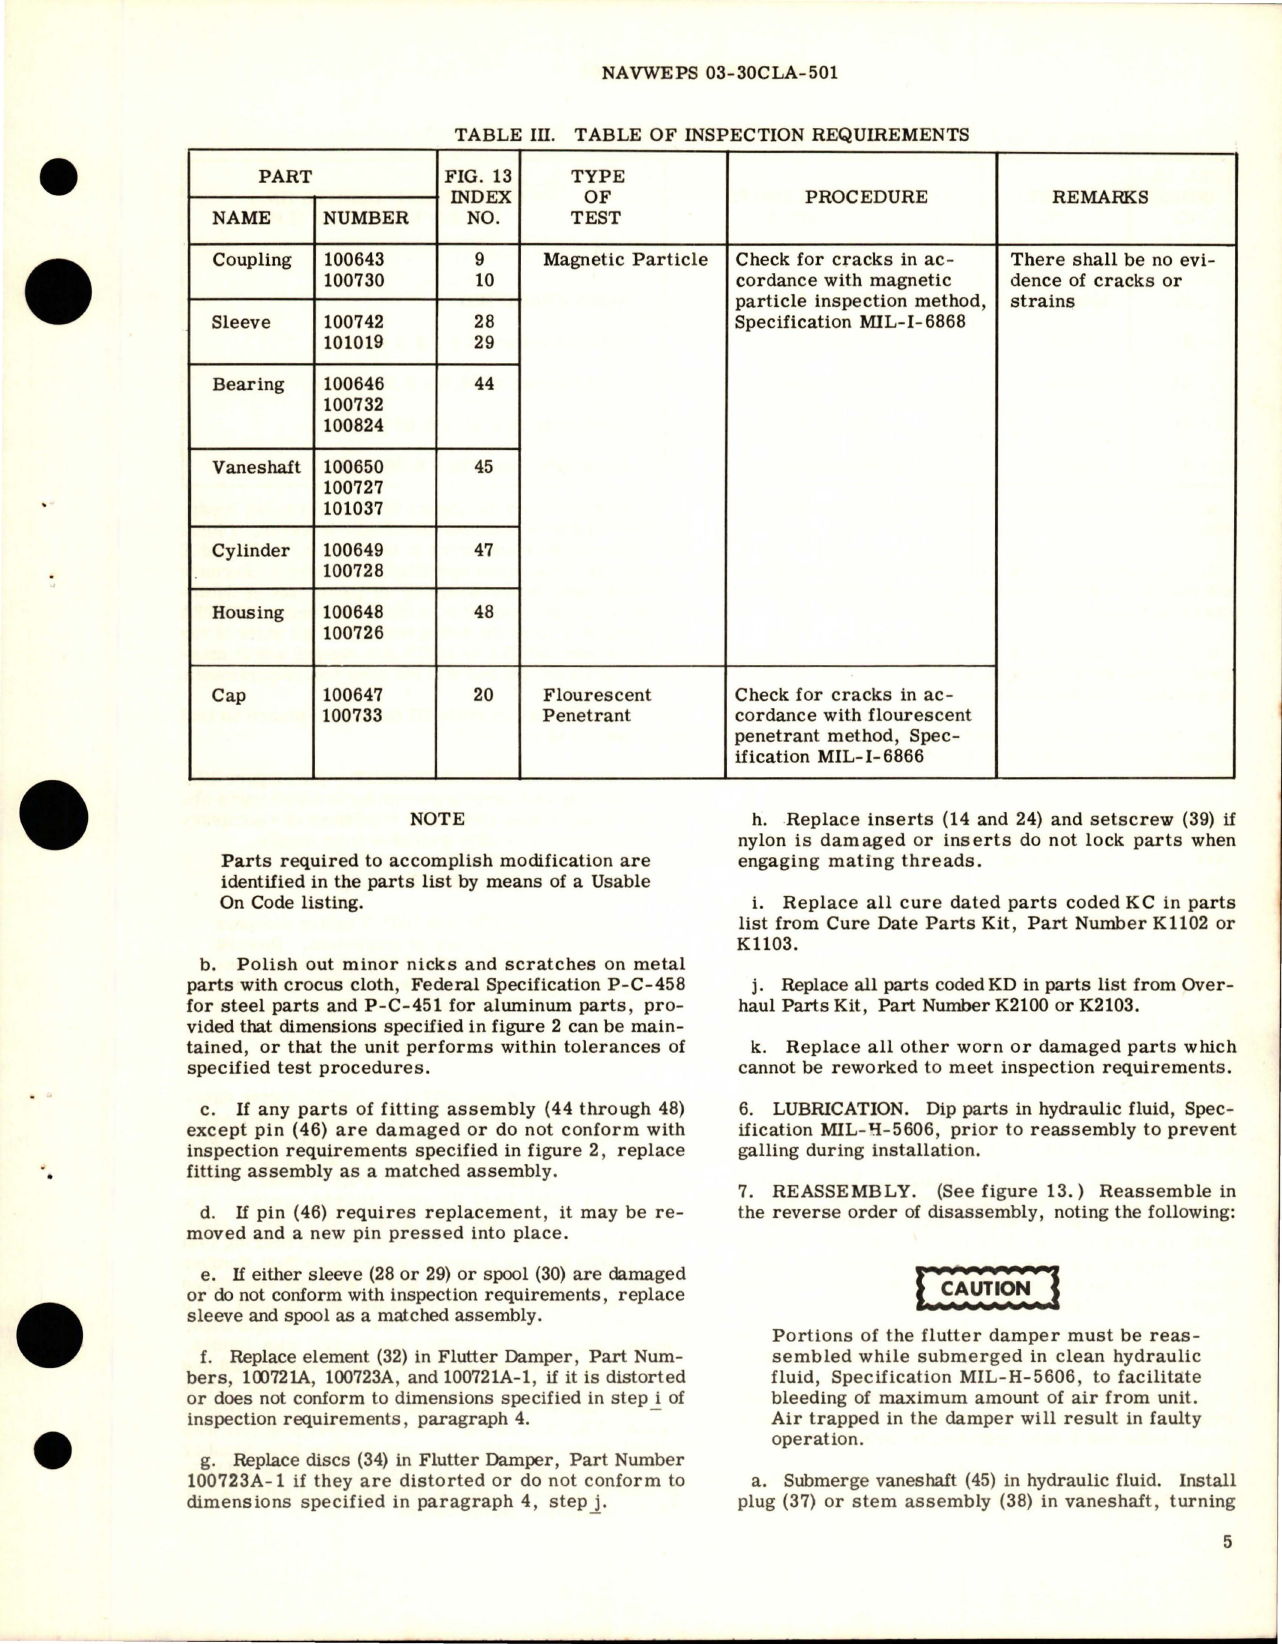 Sample page 7 from AirCorps Library document: Overhaul Instructions with Parts Breakdown for Flutter Dampers - Parts 100721, 100723, 100721A, 100723A, 100721A-1 & 100723A-1